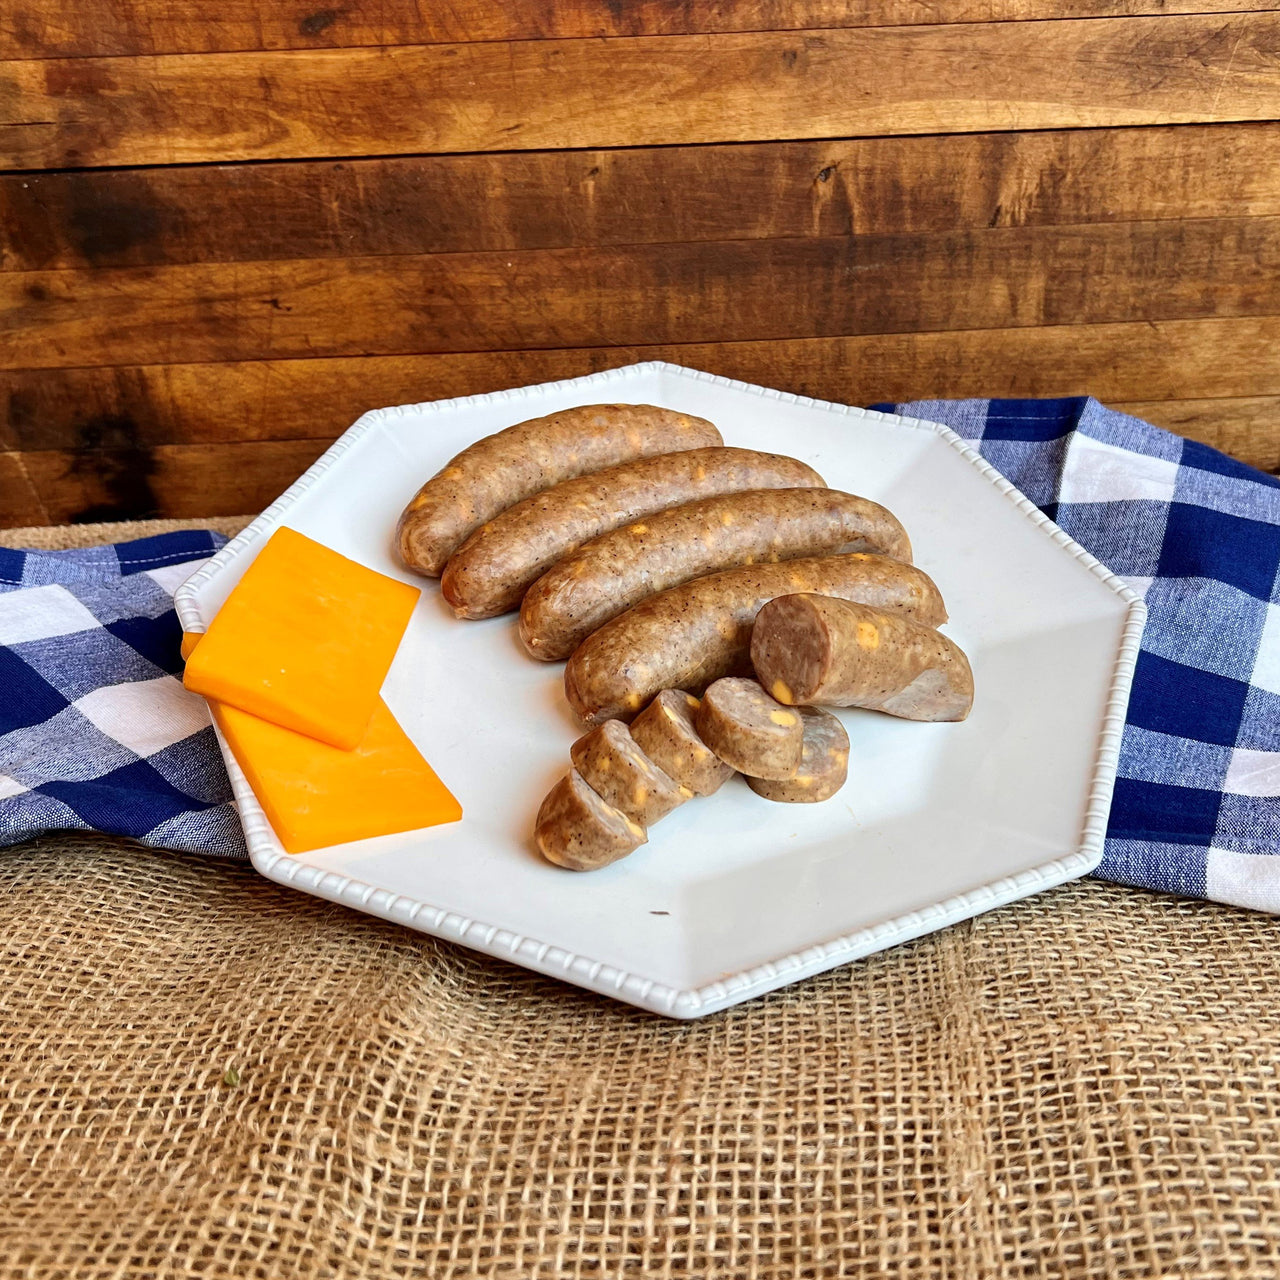 ﻿Our classic Bratwurst with the addition of Cheddar Cheese to give it additional taste of goodness!  Item #735E  ﻿1 lb. Package